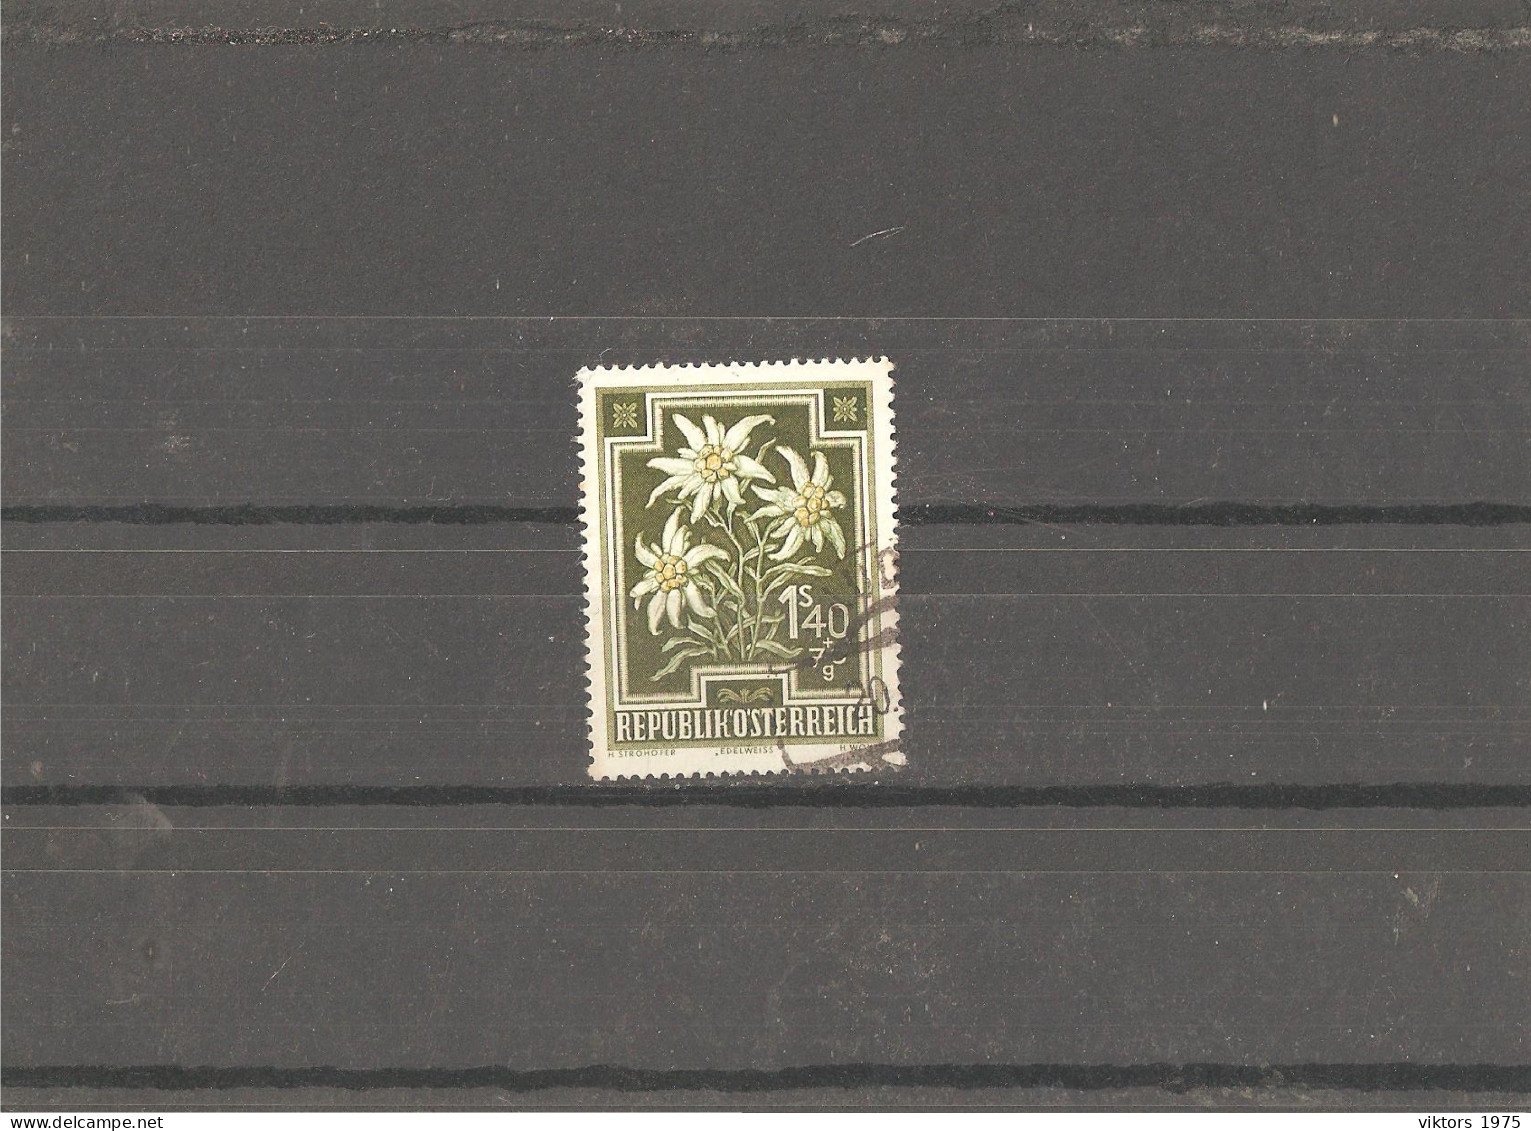 Used Stamp Nr.877 In MICHEL Catalog - Used Stamps